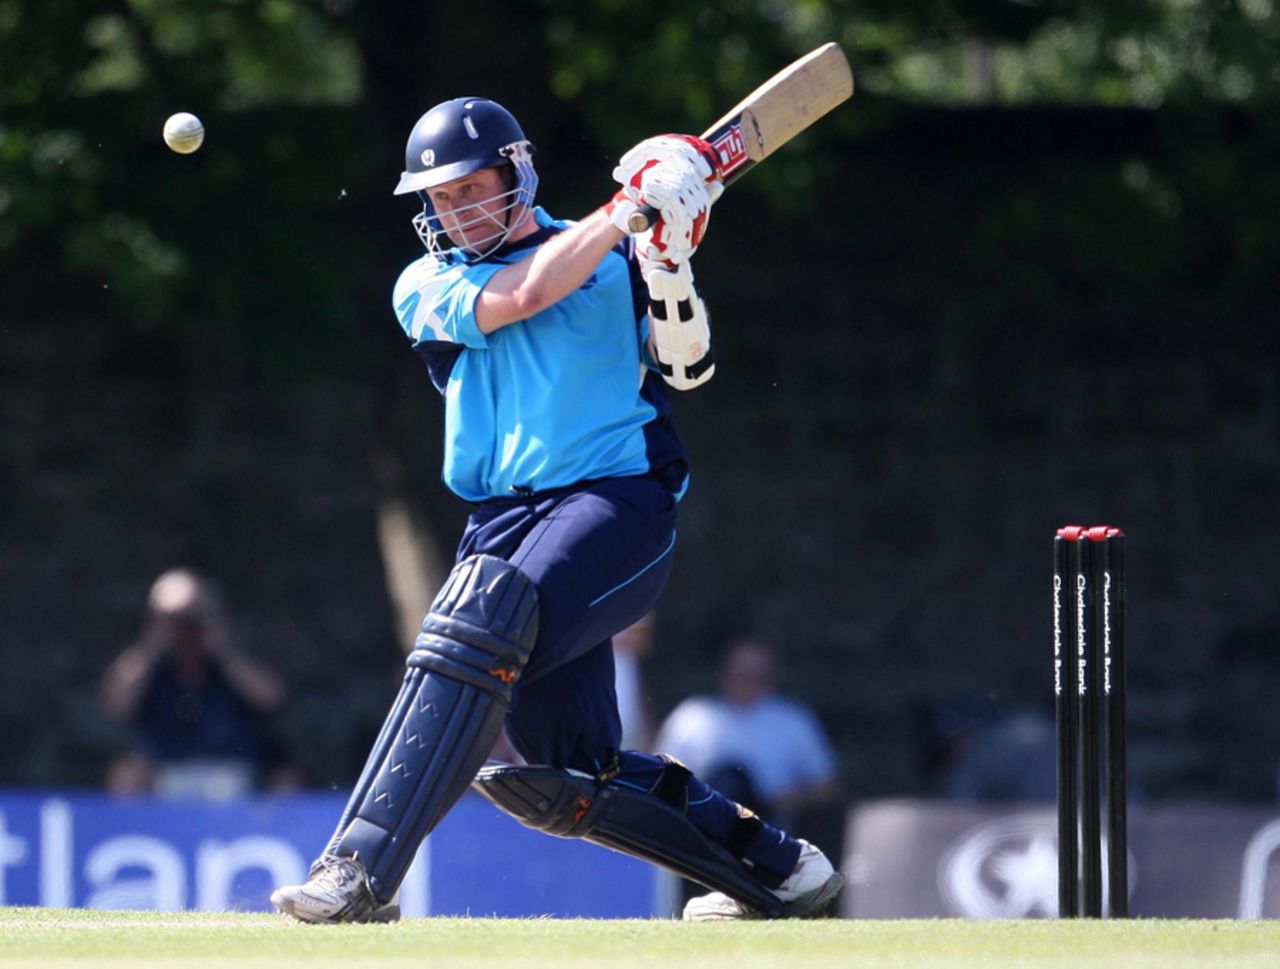 Neil McCallum on his way to 45 against Kent, Scotland v Kent, Clydesdale Bank 40, Edinburgh, May 22, 2010